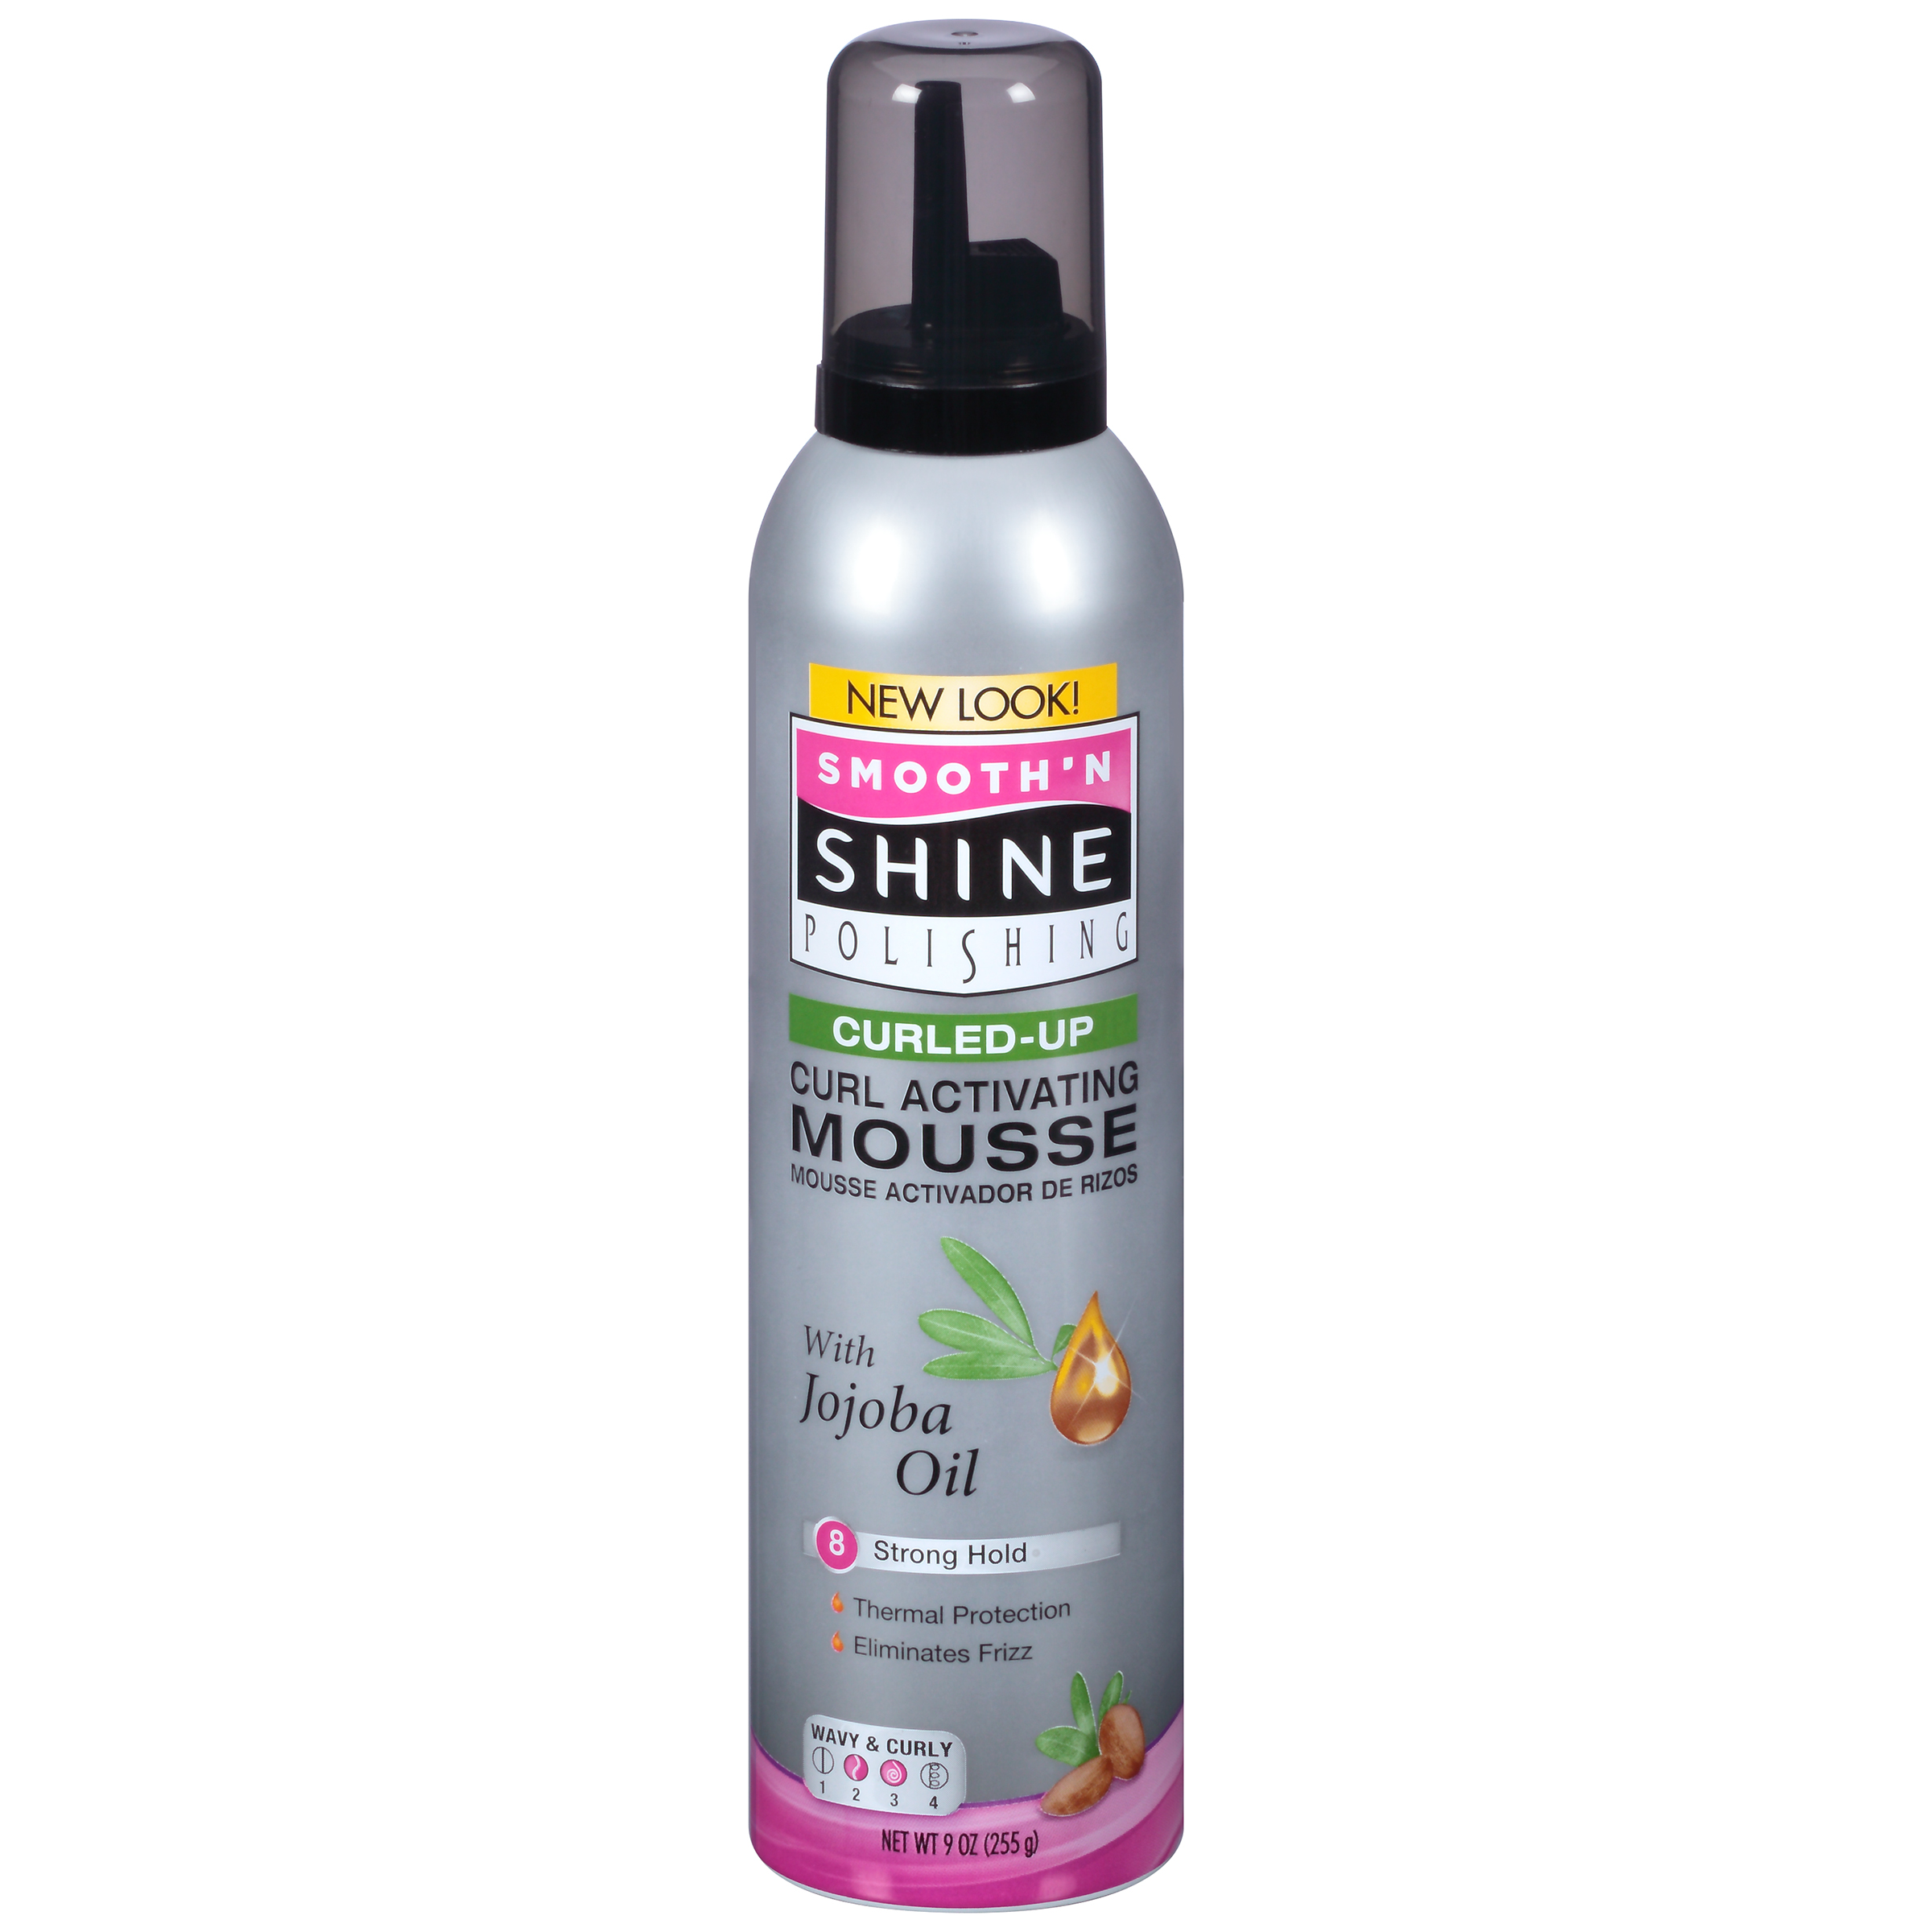 Smooth 'N Shine Polishing Mousse, Curling, Strong Hold 8, 9 oz (255 g)